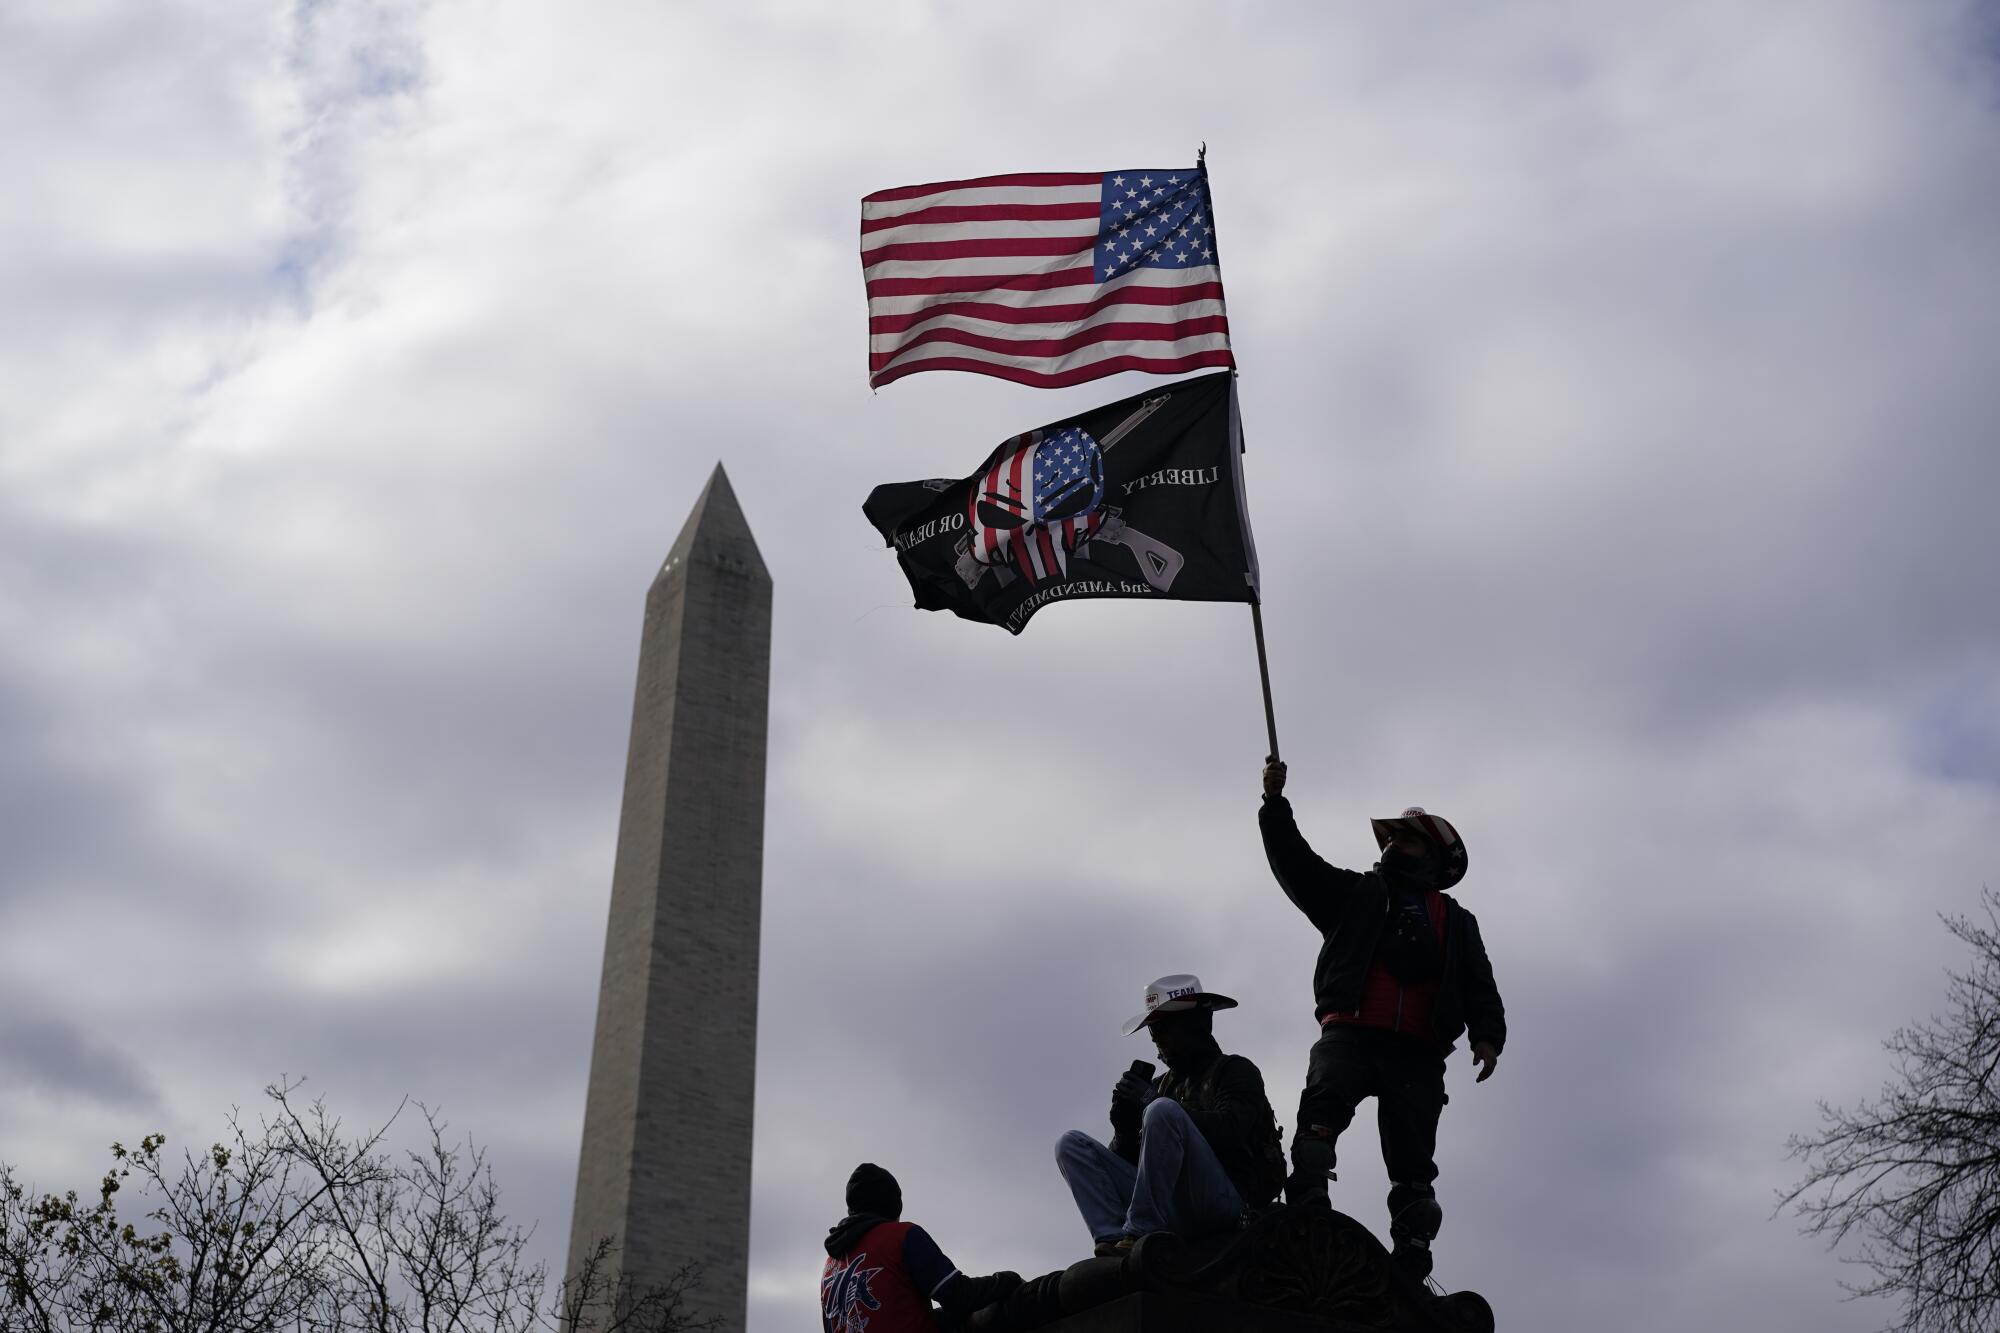 Trump supporters wave flags in front of the Washington Monument.